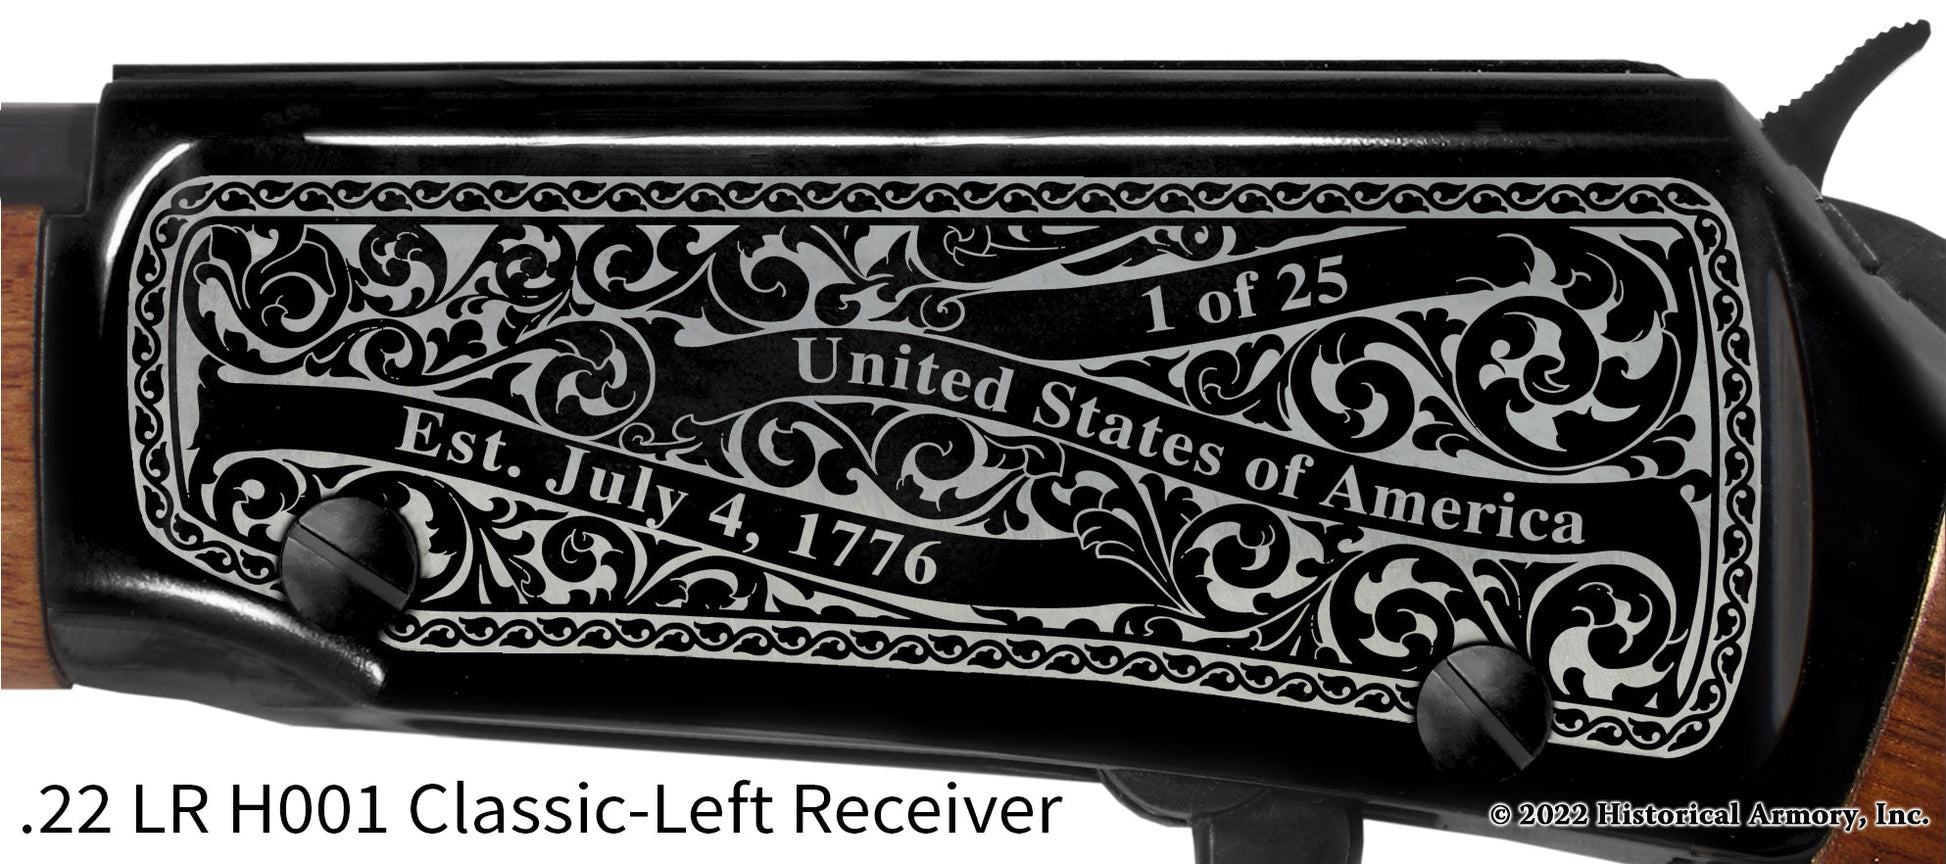 Licking County Ohio Engraved Henry H001 Rifle